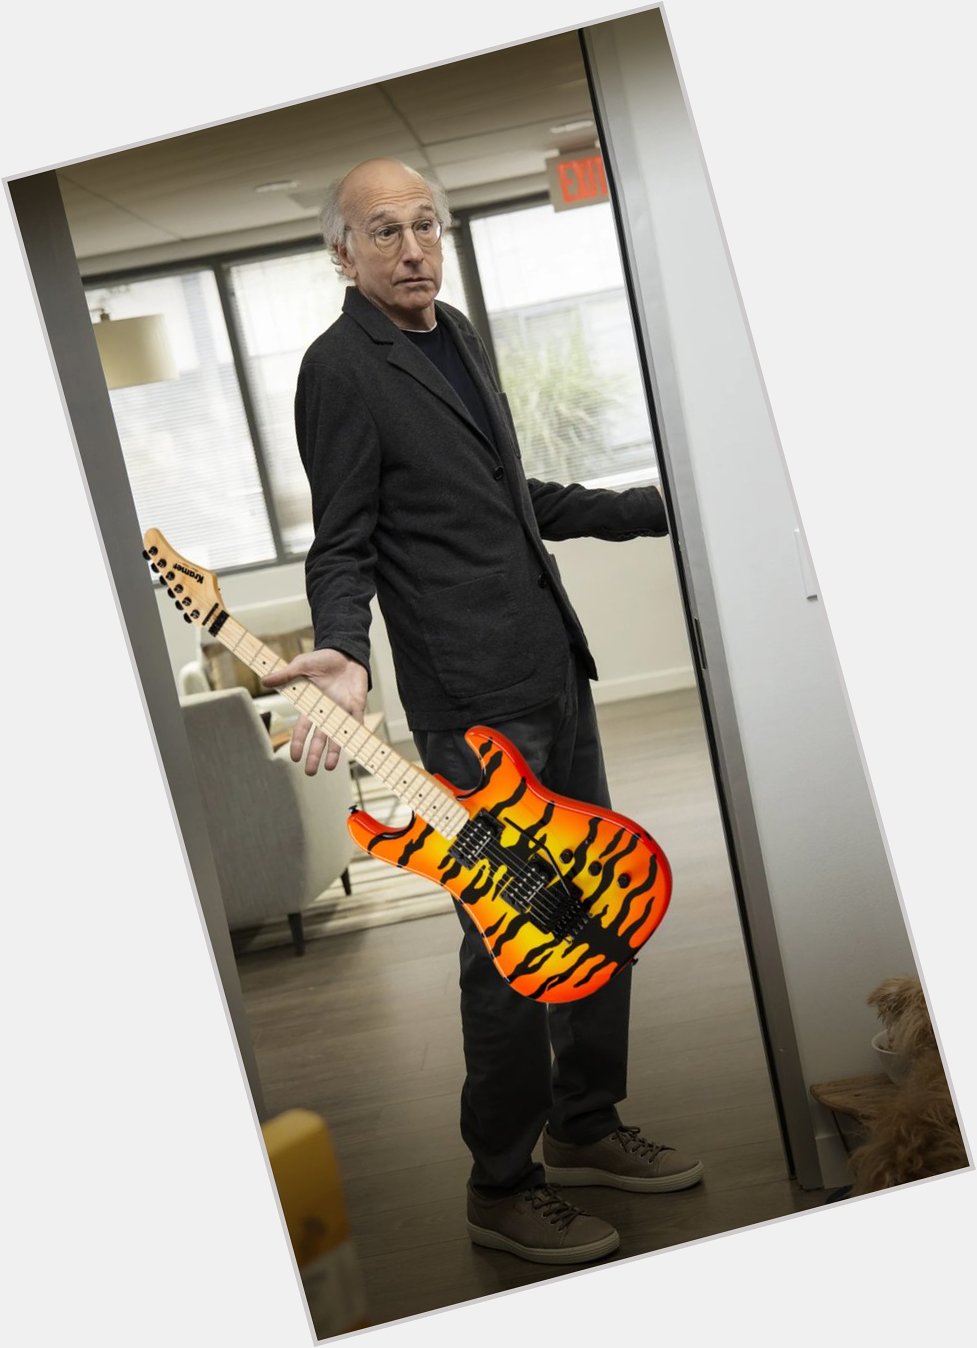 Happy birthday, Larry David!
We like to think he *can* shred, he just chooses not to. 